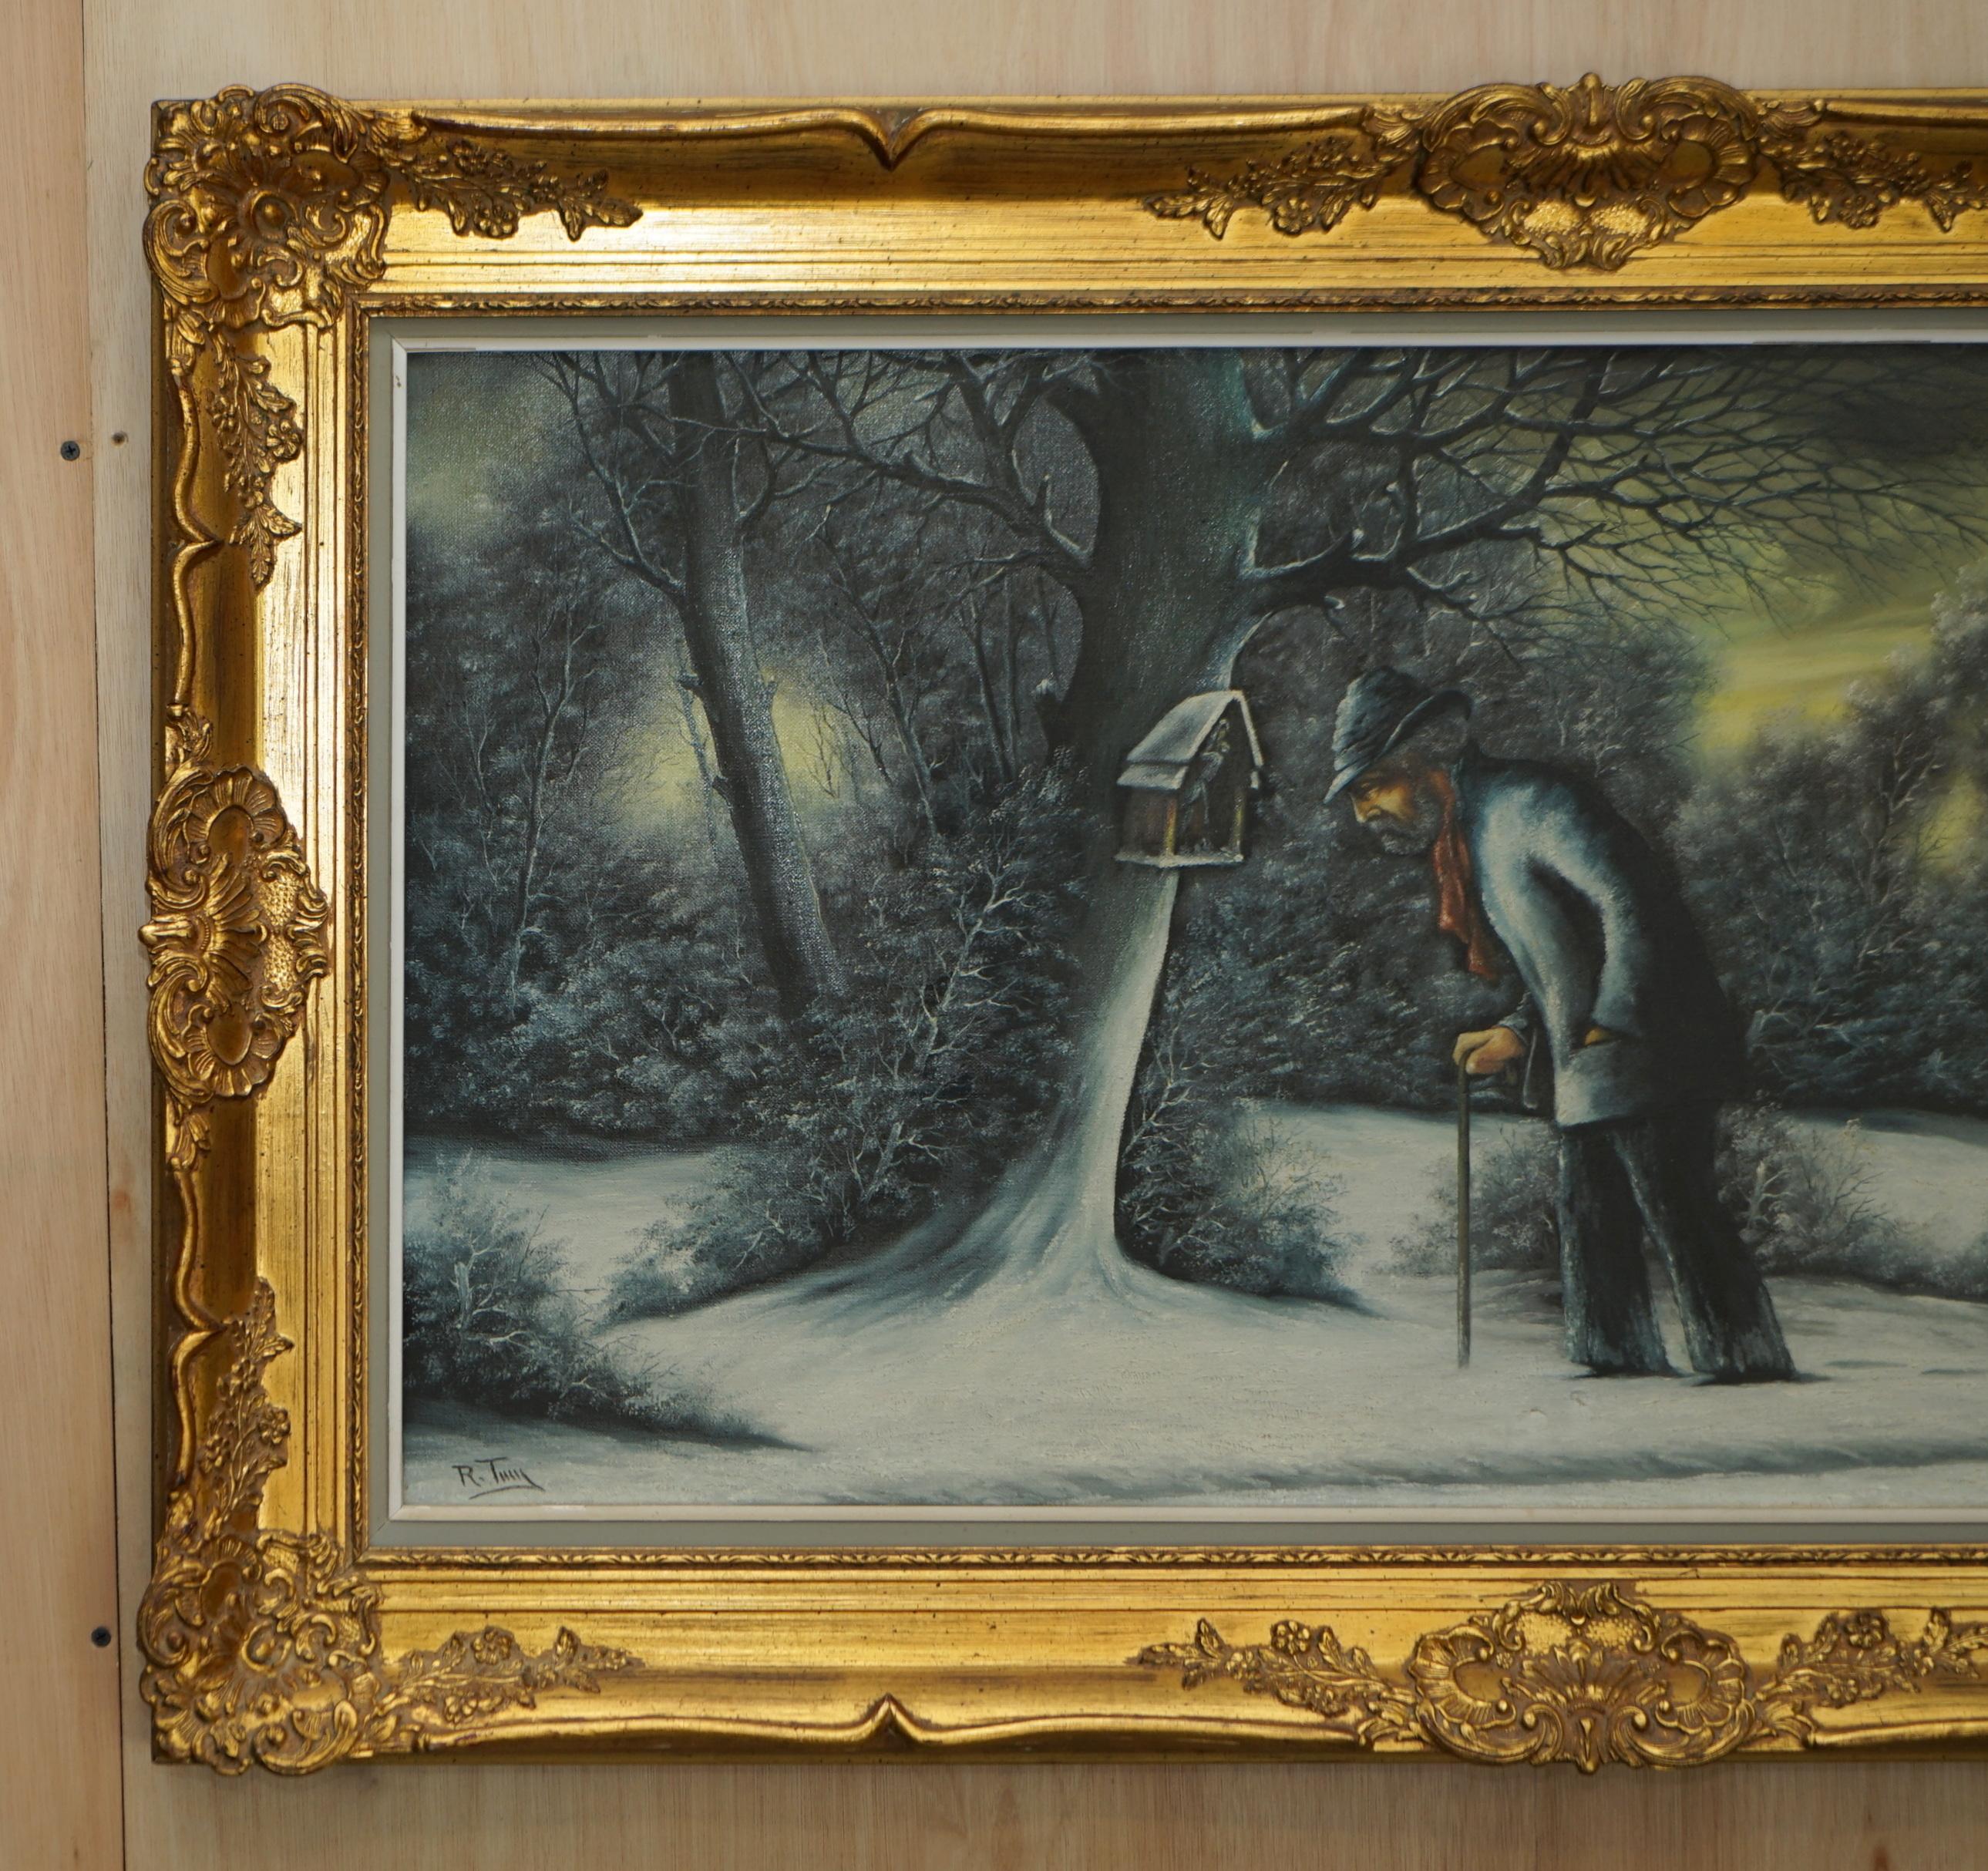 We are delighted to offer for sale this stunning original Dutch oil painting of an elderly man in a winter scene by R Tuiy 
A very good looking and decorative oil painting, this is larger than normal and really offers a window into another time